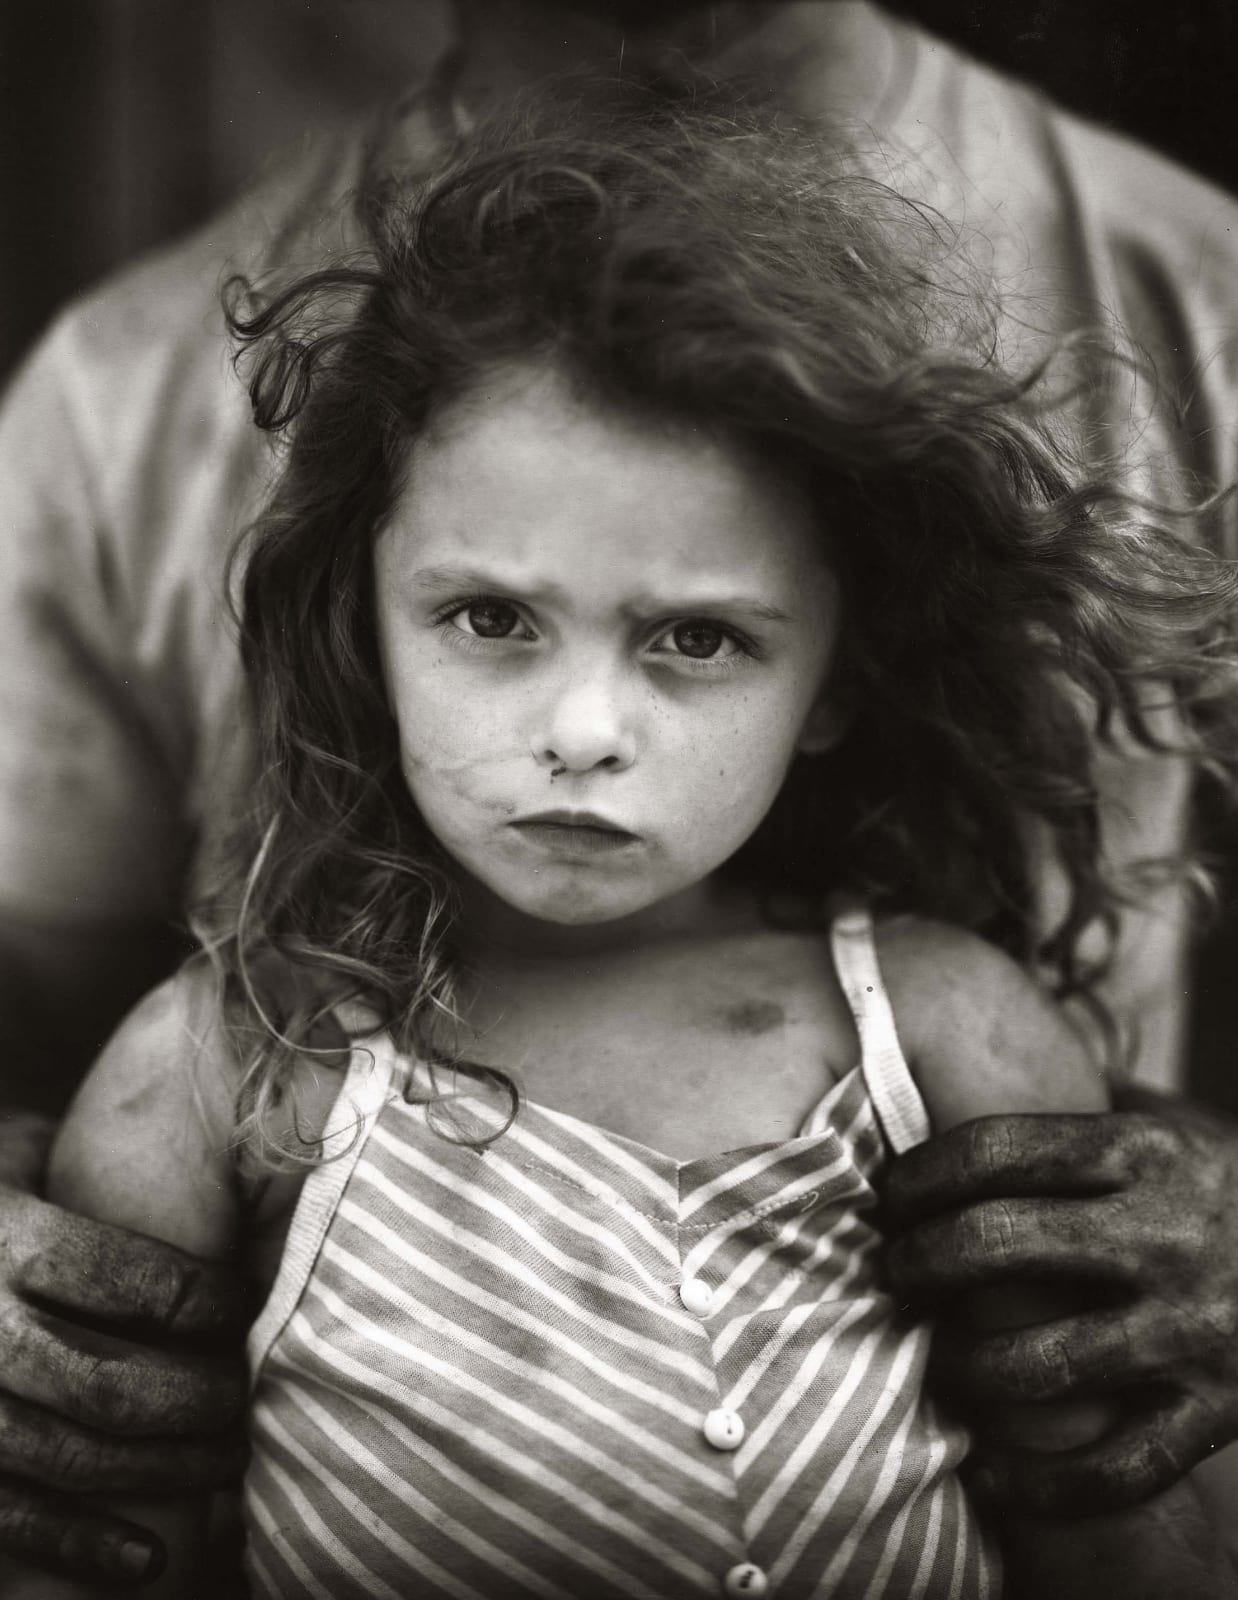 Larry holding daughter Virginia with oil slicked hands, from the Immediate Family series by Sally Mann